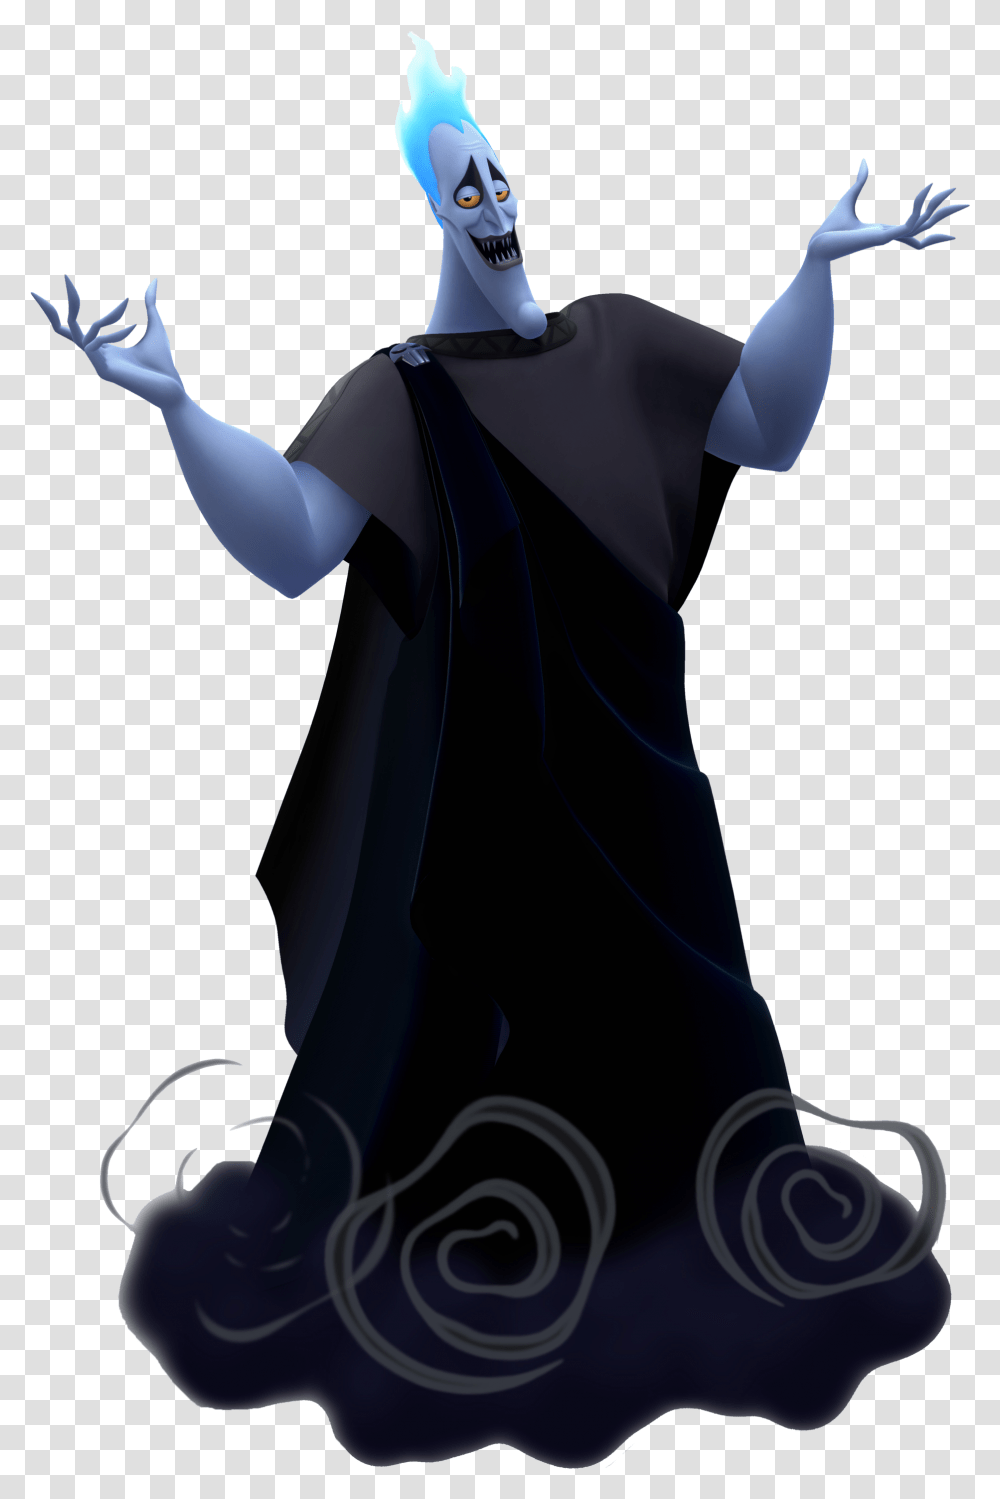 Download Kingdom Hearts 3 Hades Kingdom Hearts Hades, Clothing, Person, Dance Pose, Leisure Activities Transparent Png